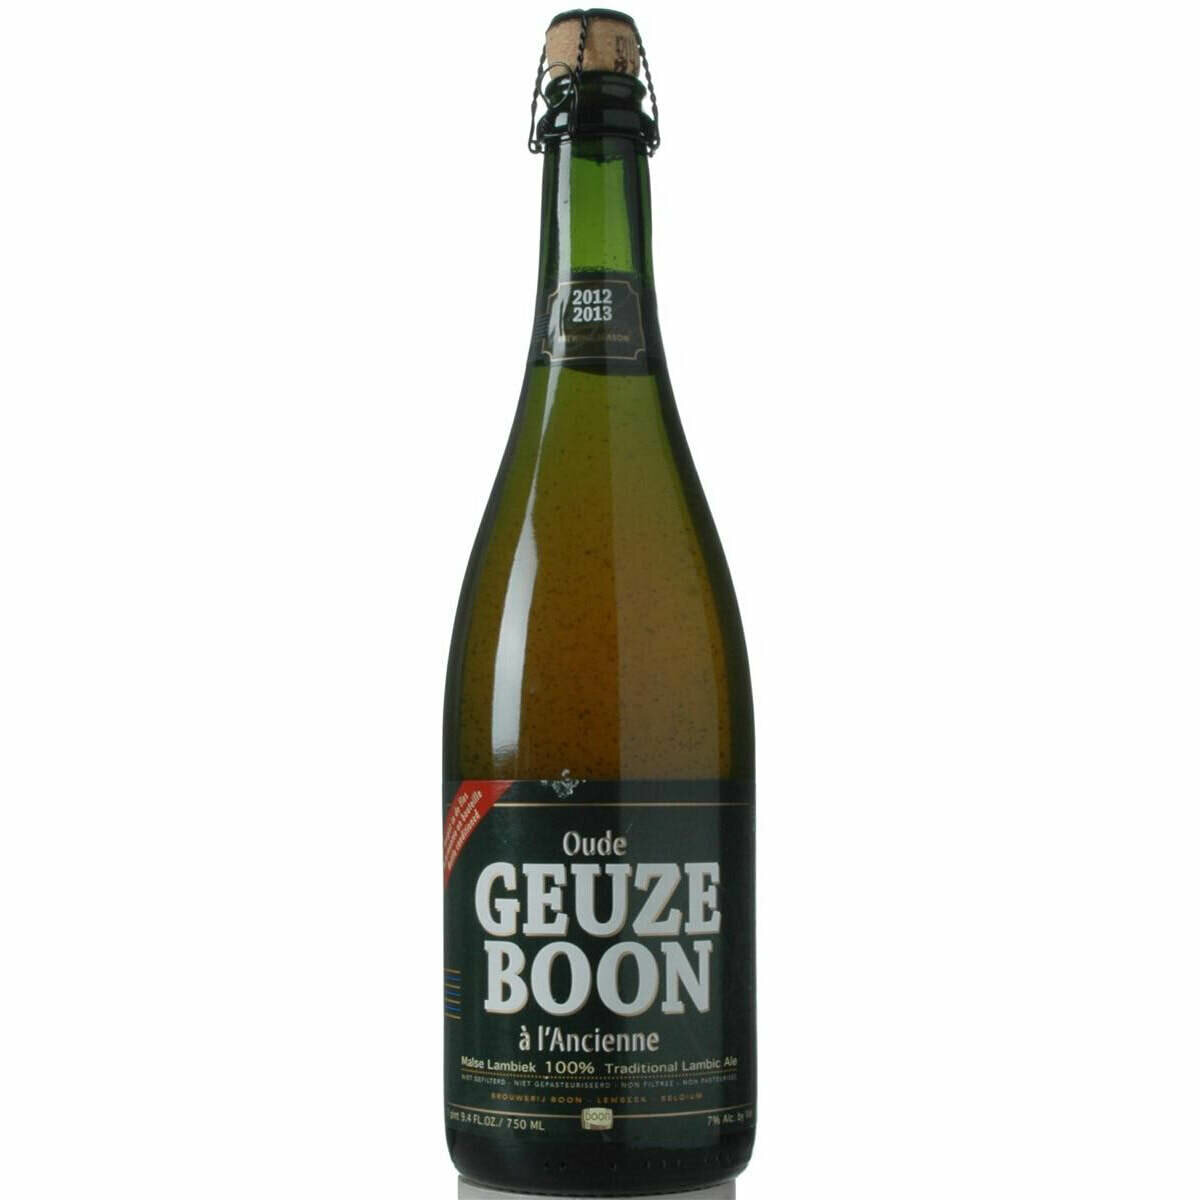 Boon Oude Geuze Lambic 2012-2013 LARGE 750ml